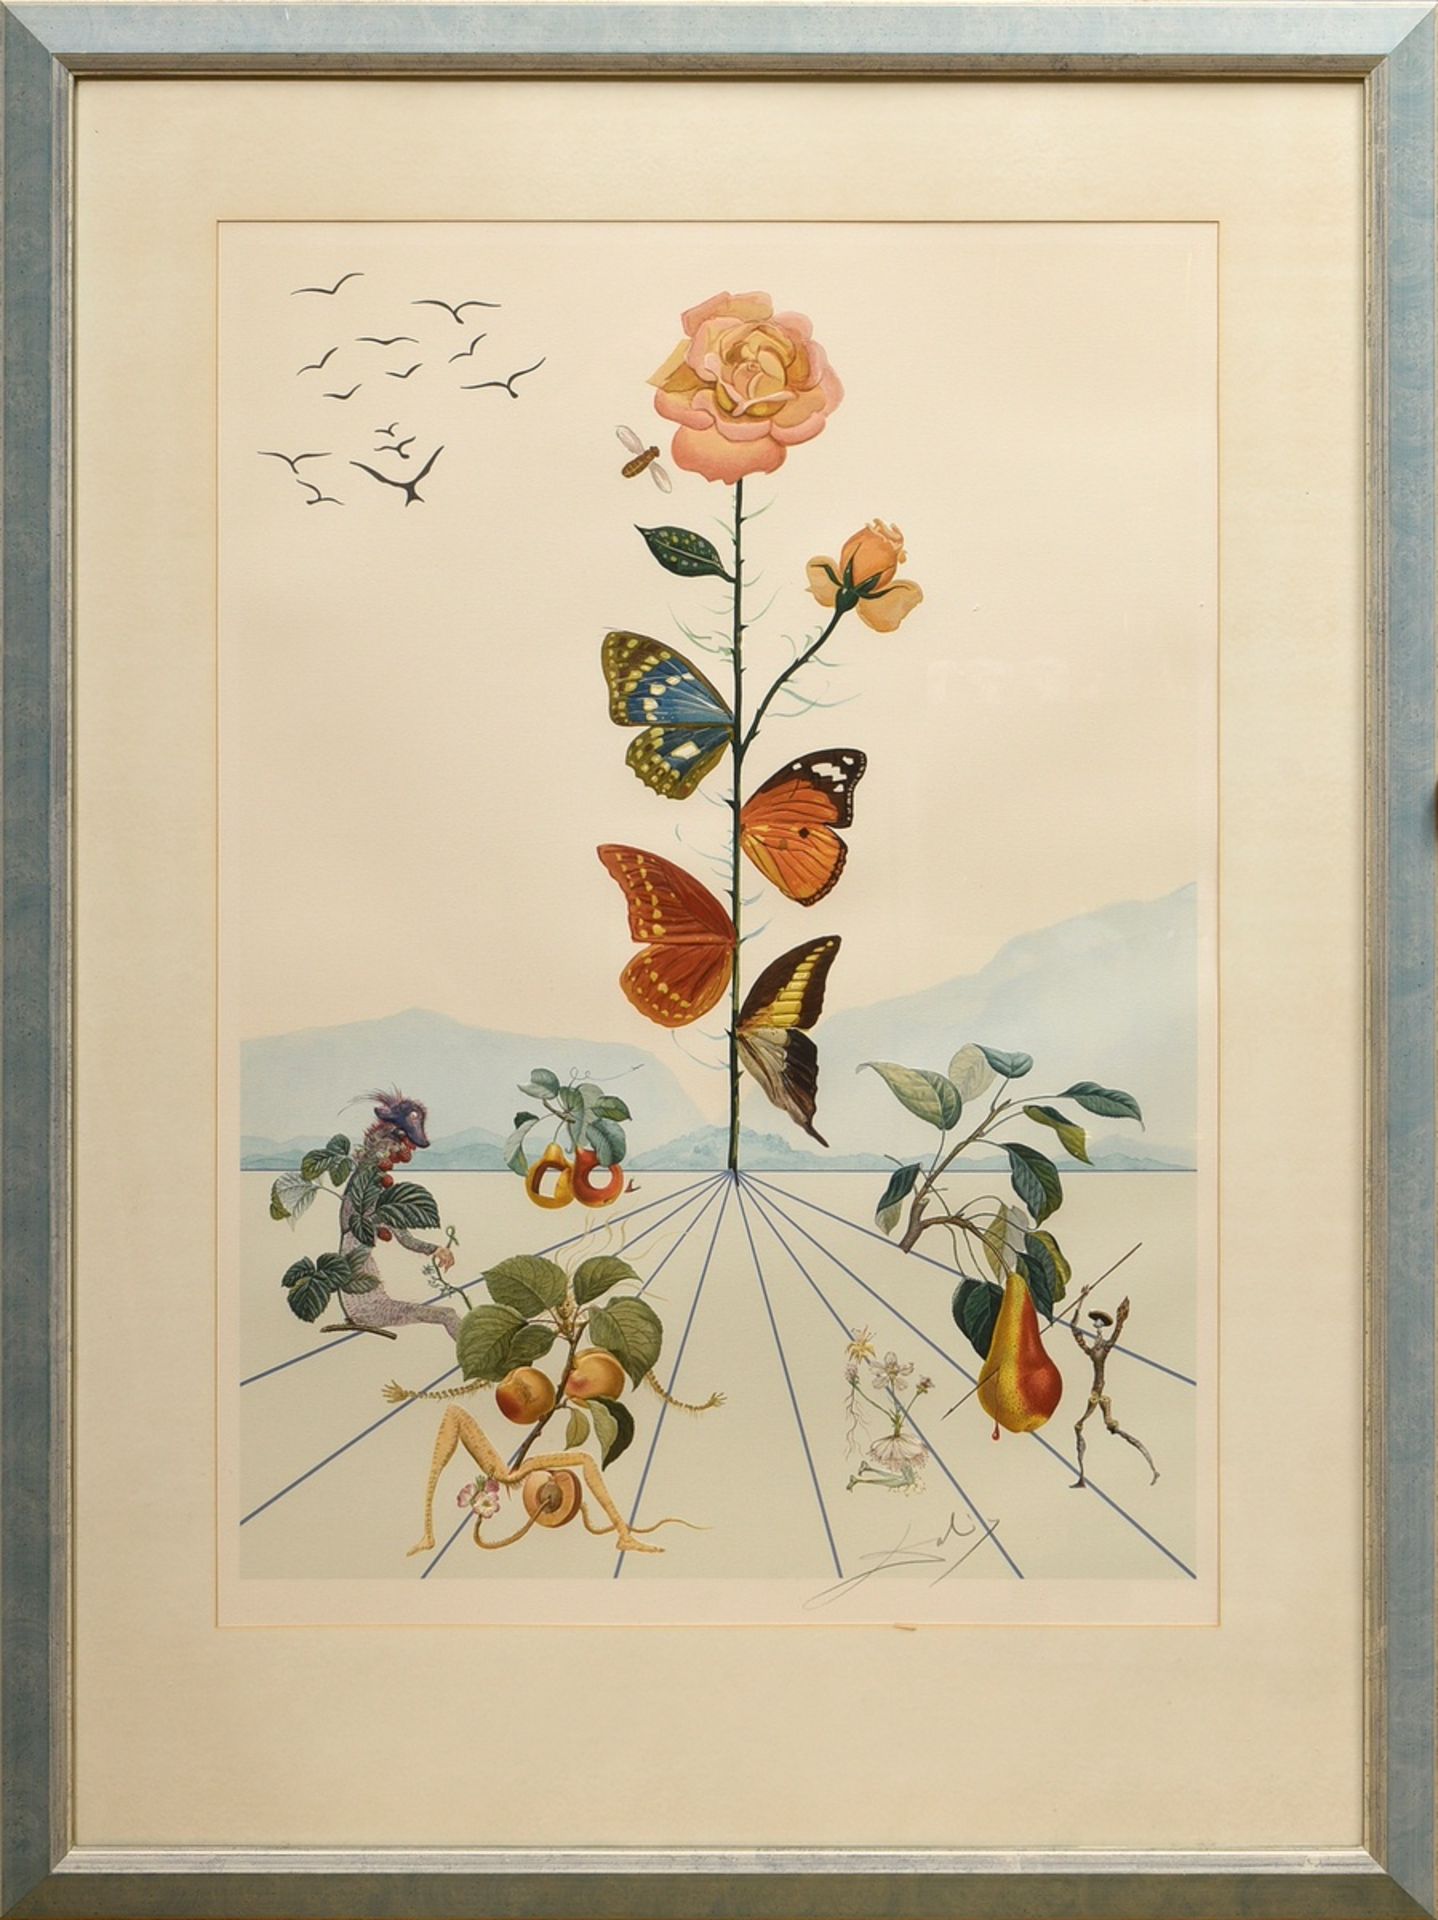 Dalí, Salvador (1904-1989) "Flordali II" 1981, colour lithograph with relief embossing, 705/4480, s - Image 2 of 4